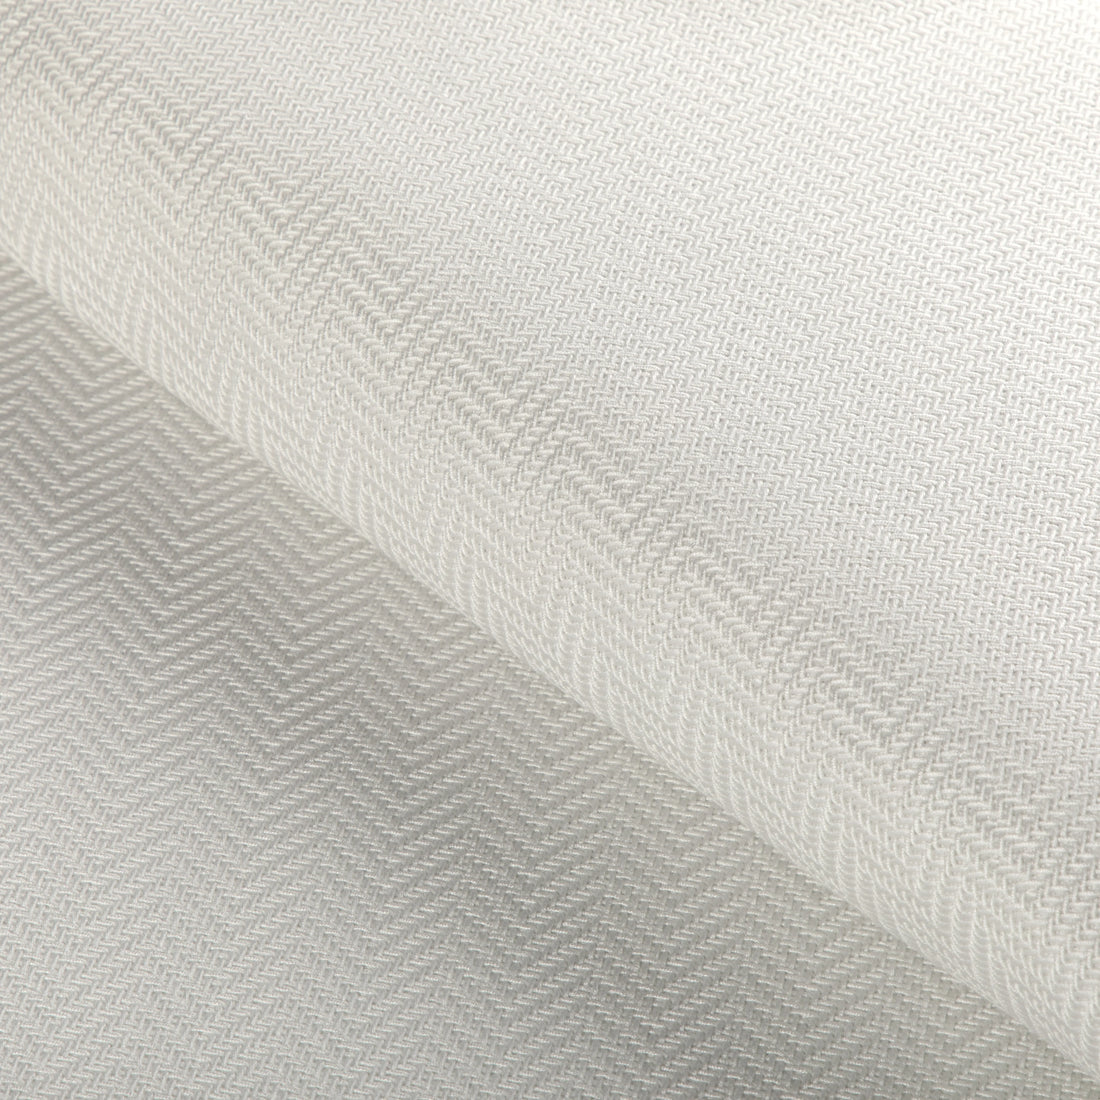 Fabric sample of Beachfront fabric in pearl color - pattern 36923.101.0 - by Kravet Couture in the Riviera collection